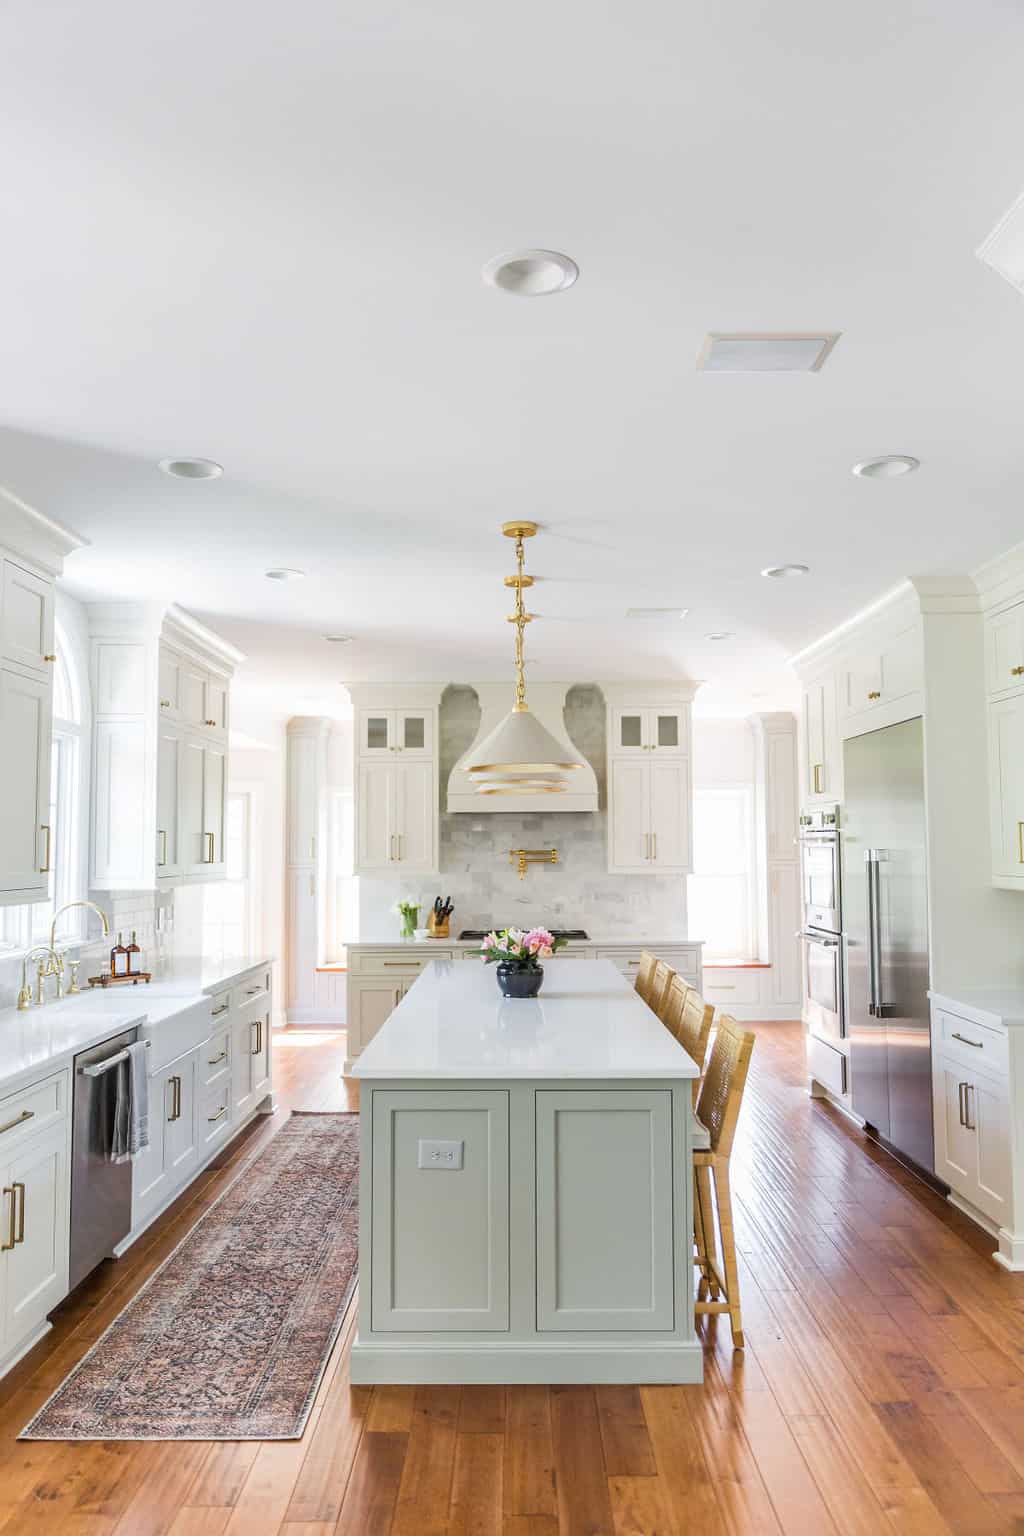 Nicholas Design Build | A white kitchen with a large island and hardwood floors, perfect for a remodel.